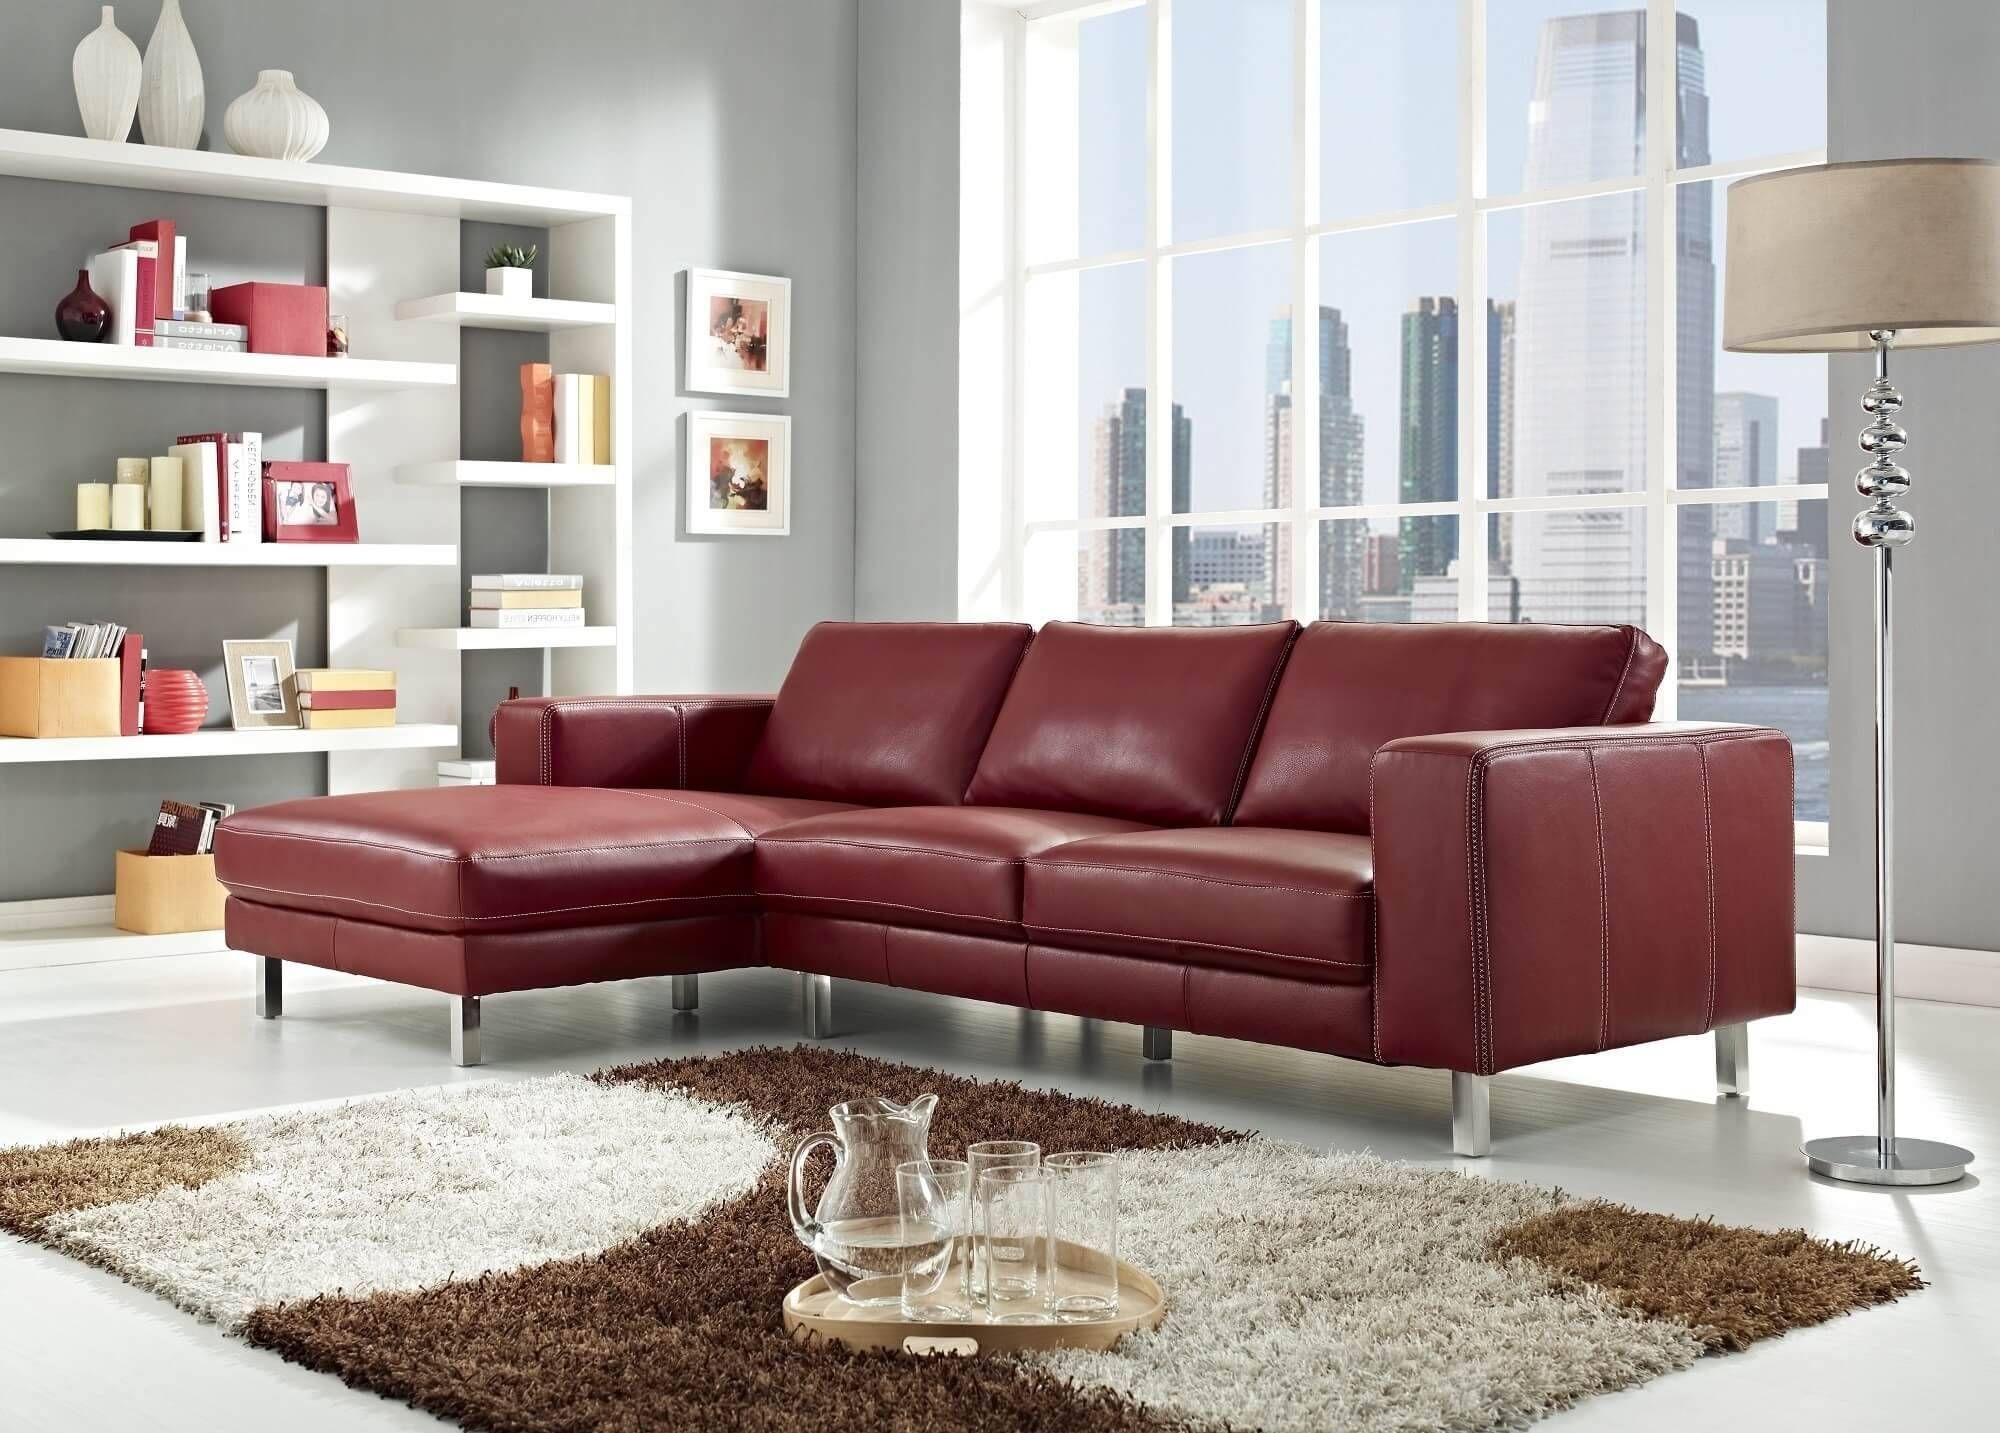 Decorating: Interesting Design Deep Sectional Sofa With Marvelous With Deep Cushion Sofa (View 11 of 16)